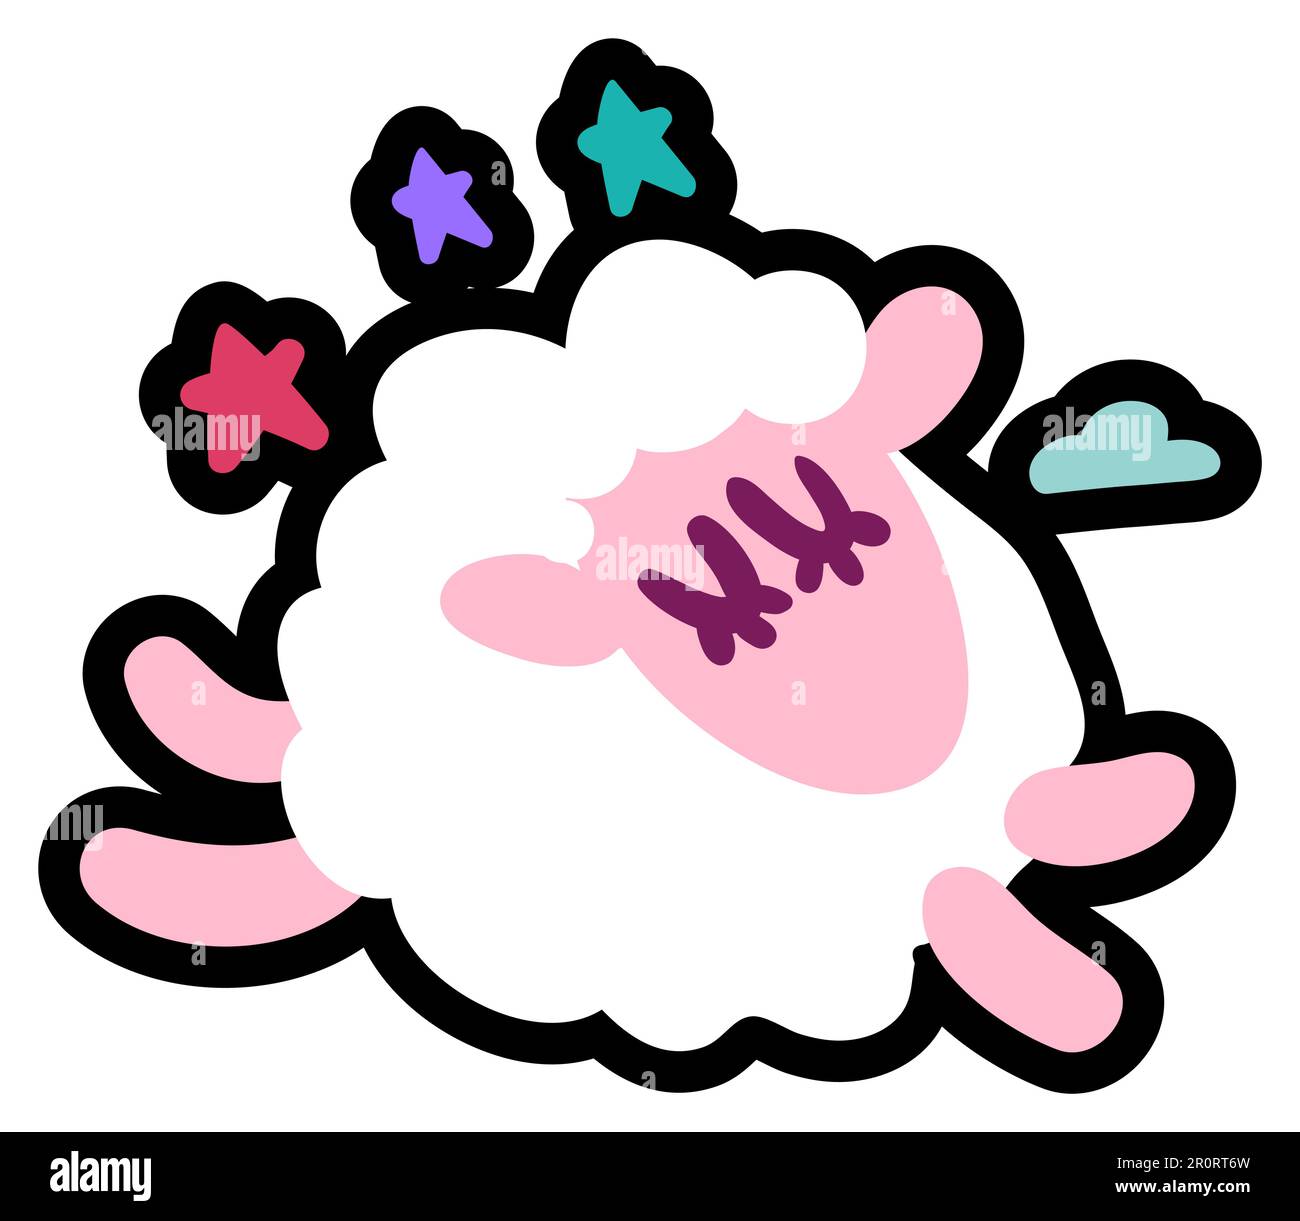 Happy Pretty Sleeping Lamb Dreams Symbol Cartoon. Sleep, Dreamy and Jumping Wooly Little Sheep among Sky Stars and Cloud Isolated on White Background. Stock Vector